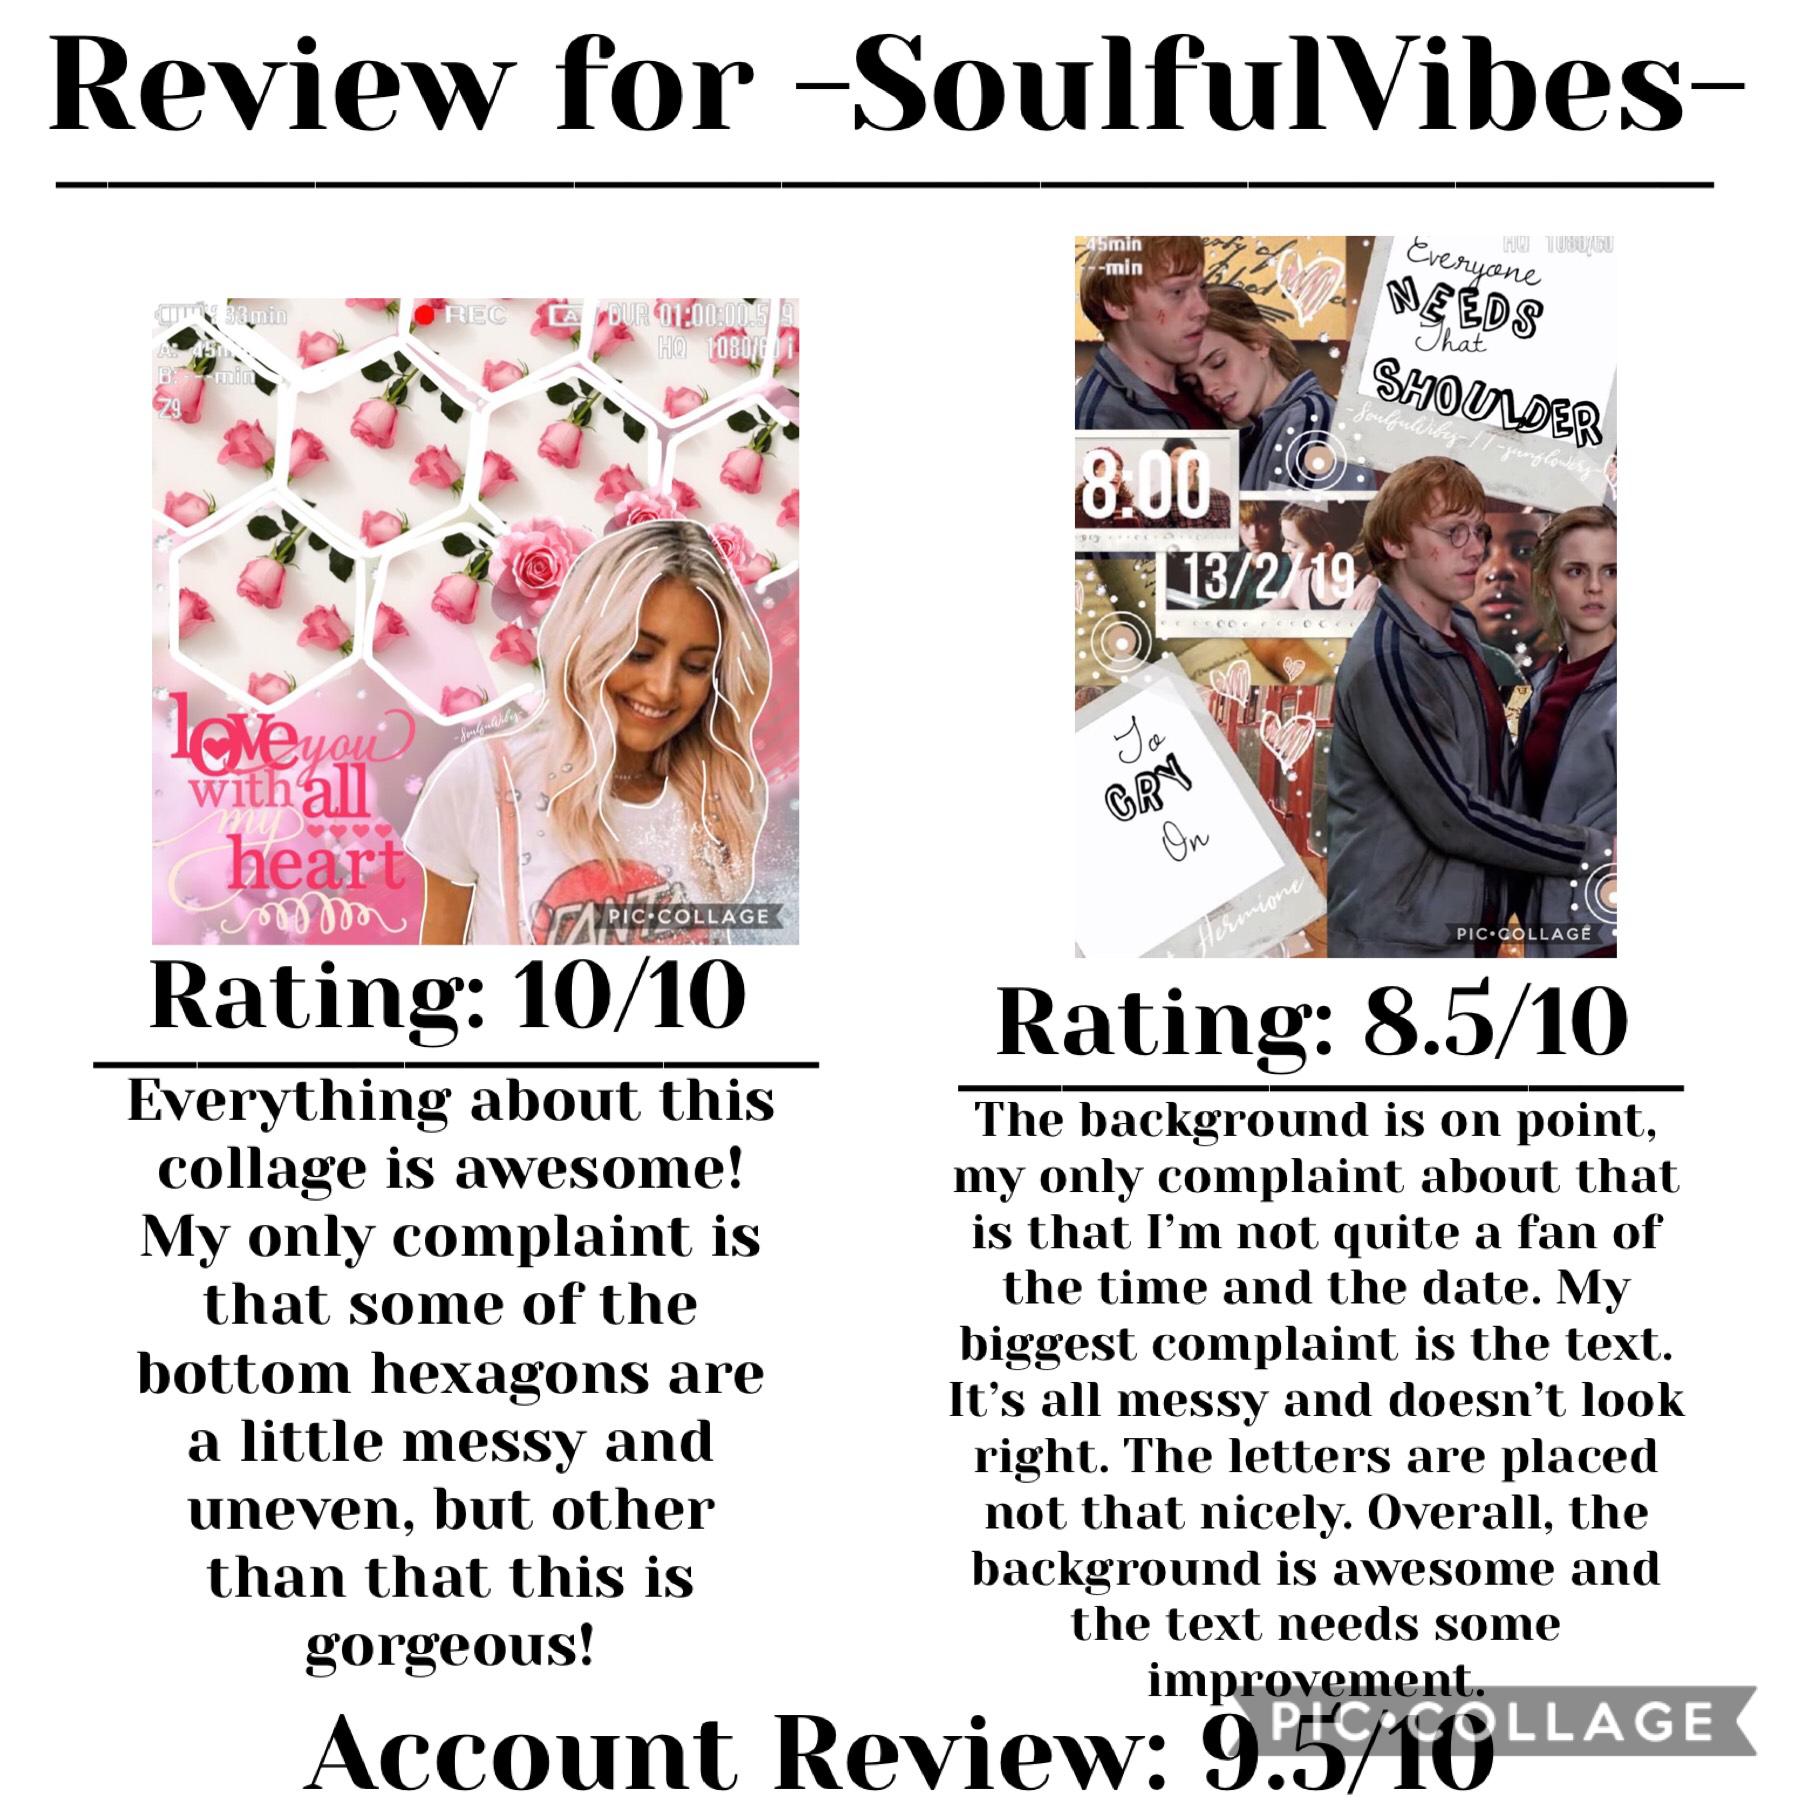 Review for -SoulfulVibes- 👏🏻👏🏻👏🏻 awesome account! 😀